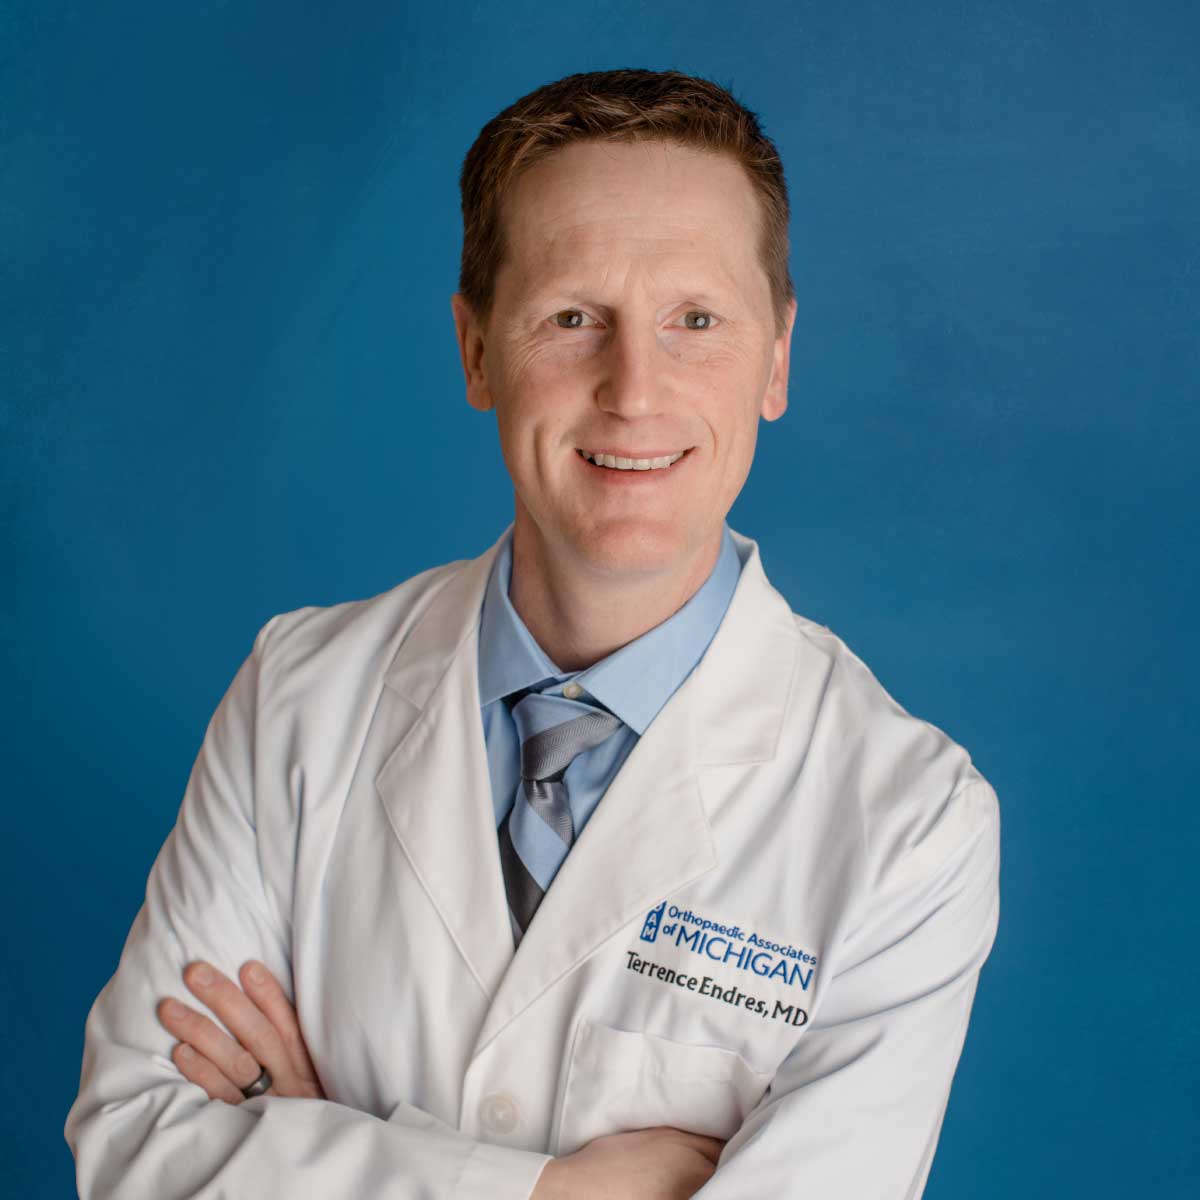 Terrence Endres, MD - Orthopedic Doctors in Greater Grand Rapids MI